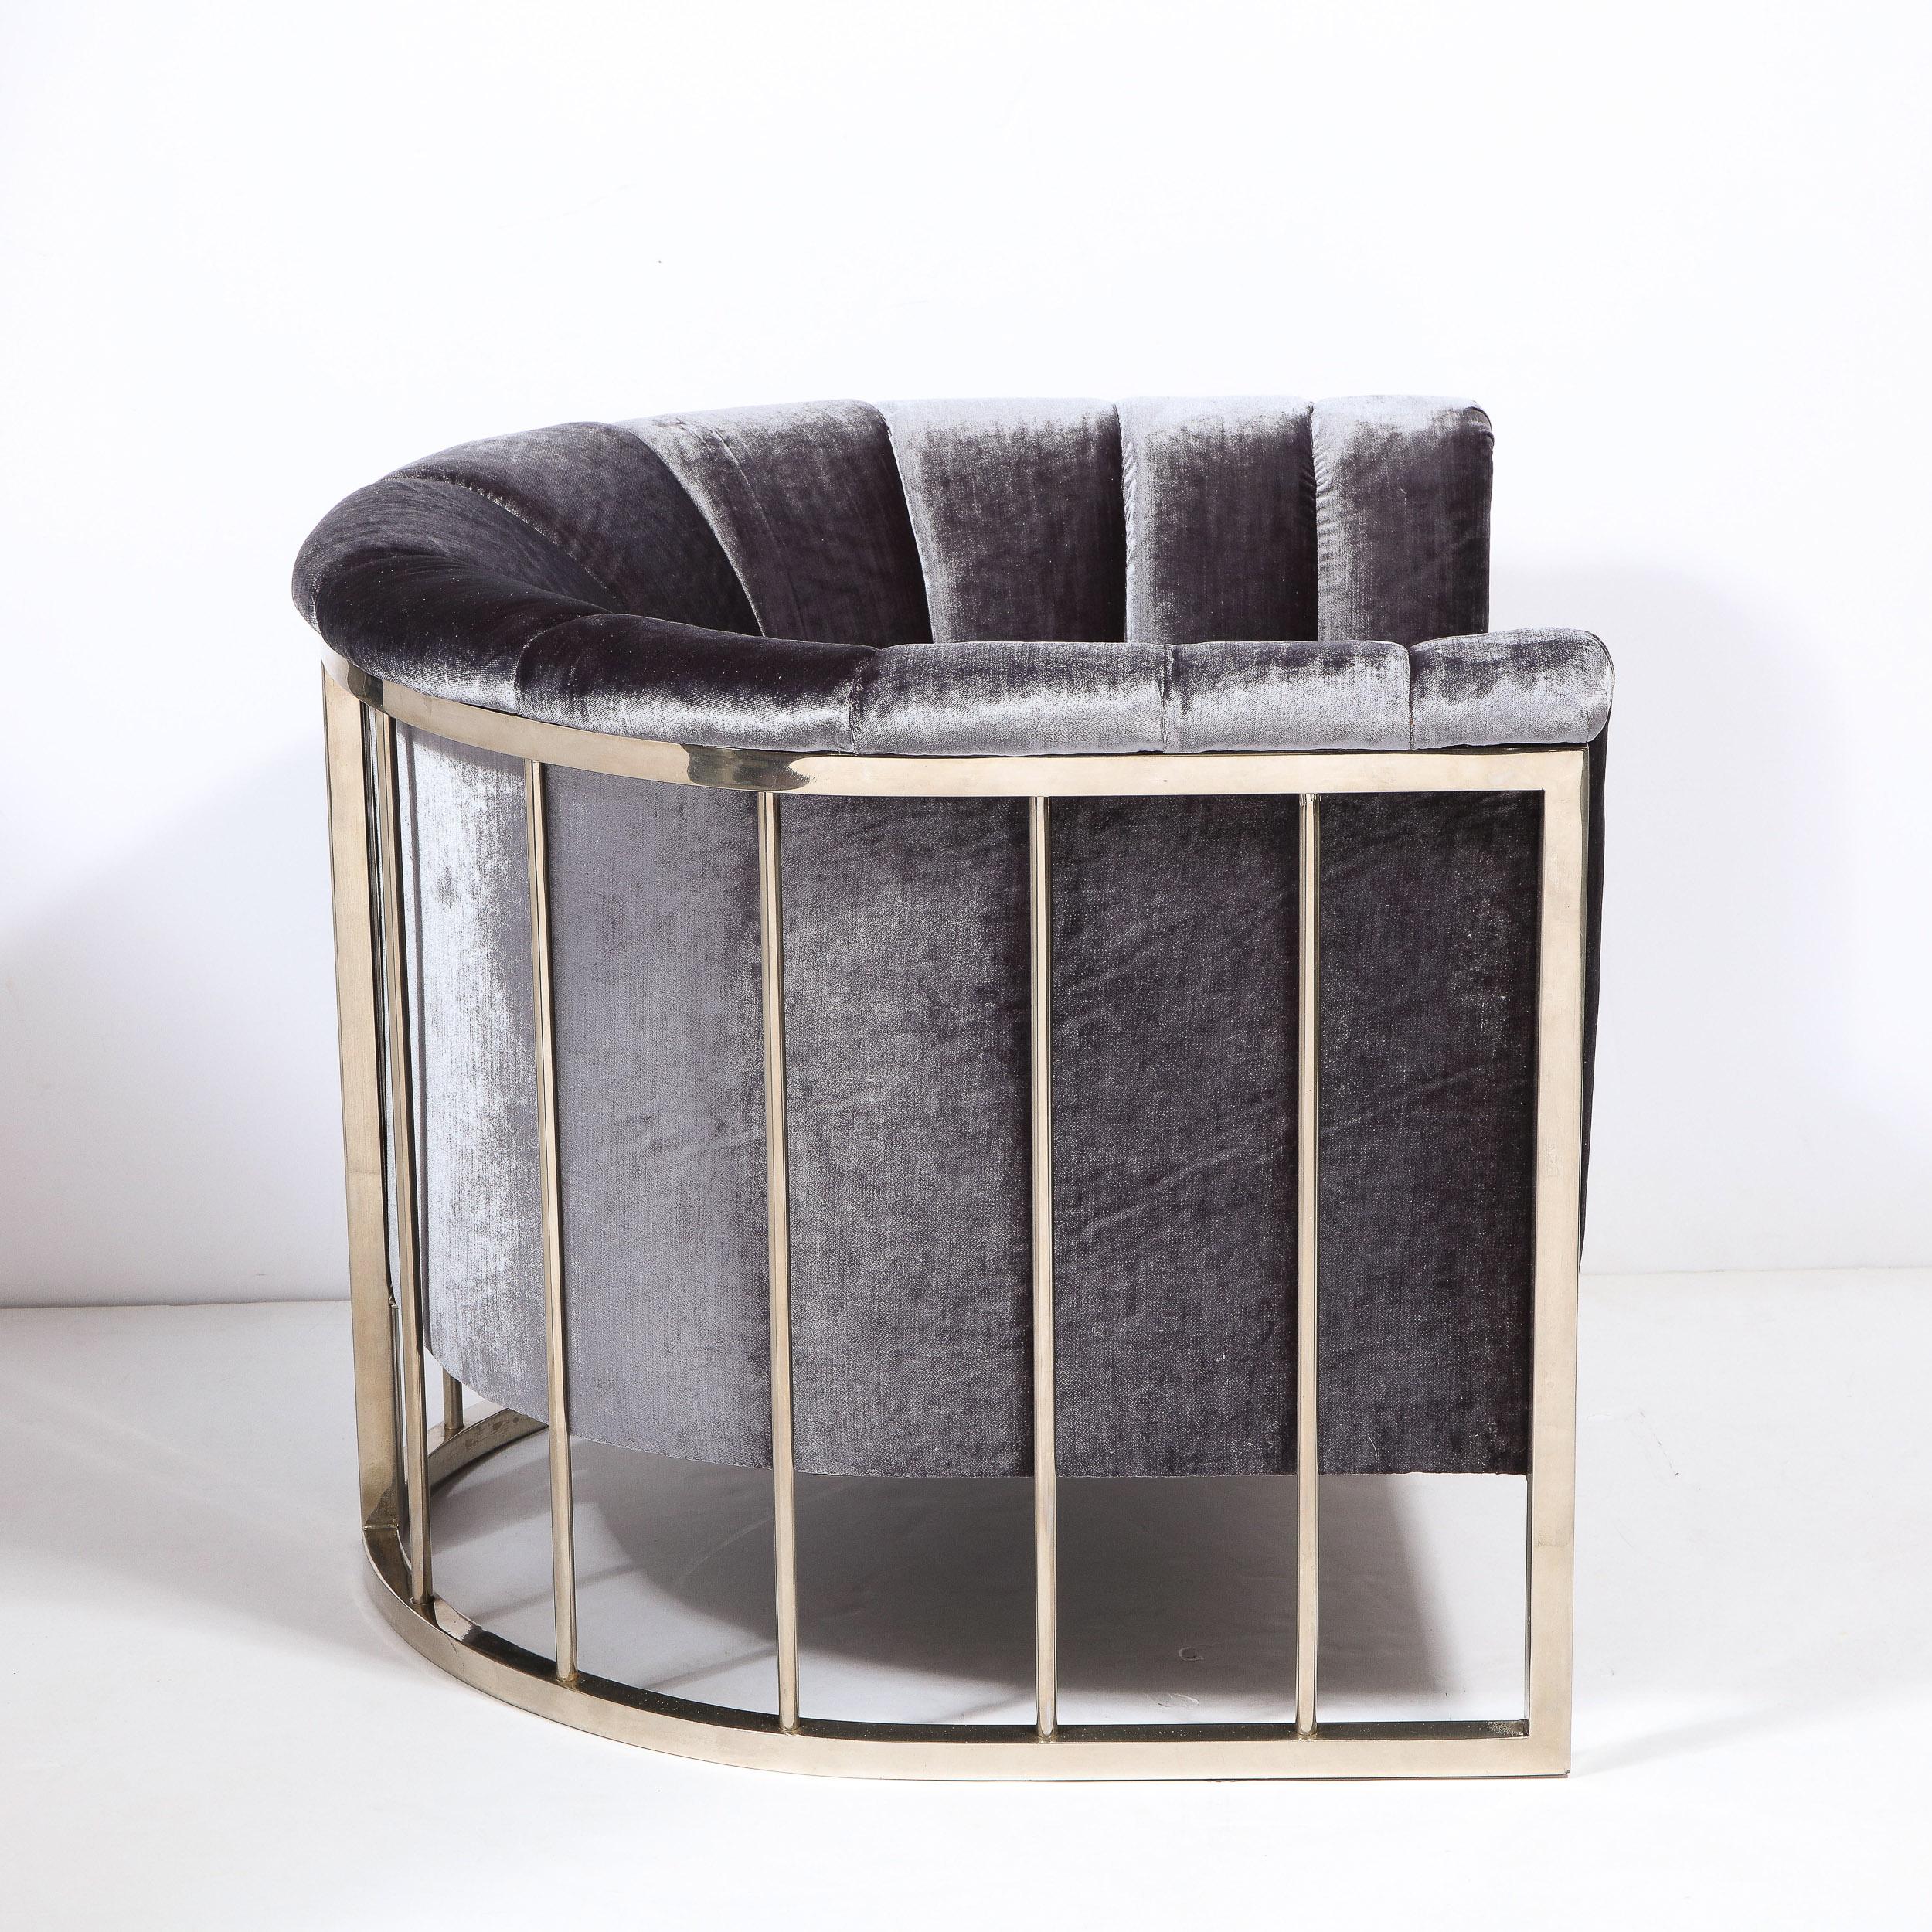 This stunning and sculptural lounge/arm chair designed in the manner of the esteemed American designer Milo Baughman in the United States circa 1970. It features a rail back design consisting of a demilune frame consisting of bent and welded